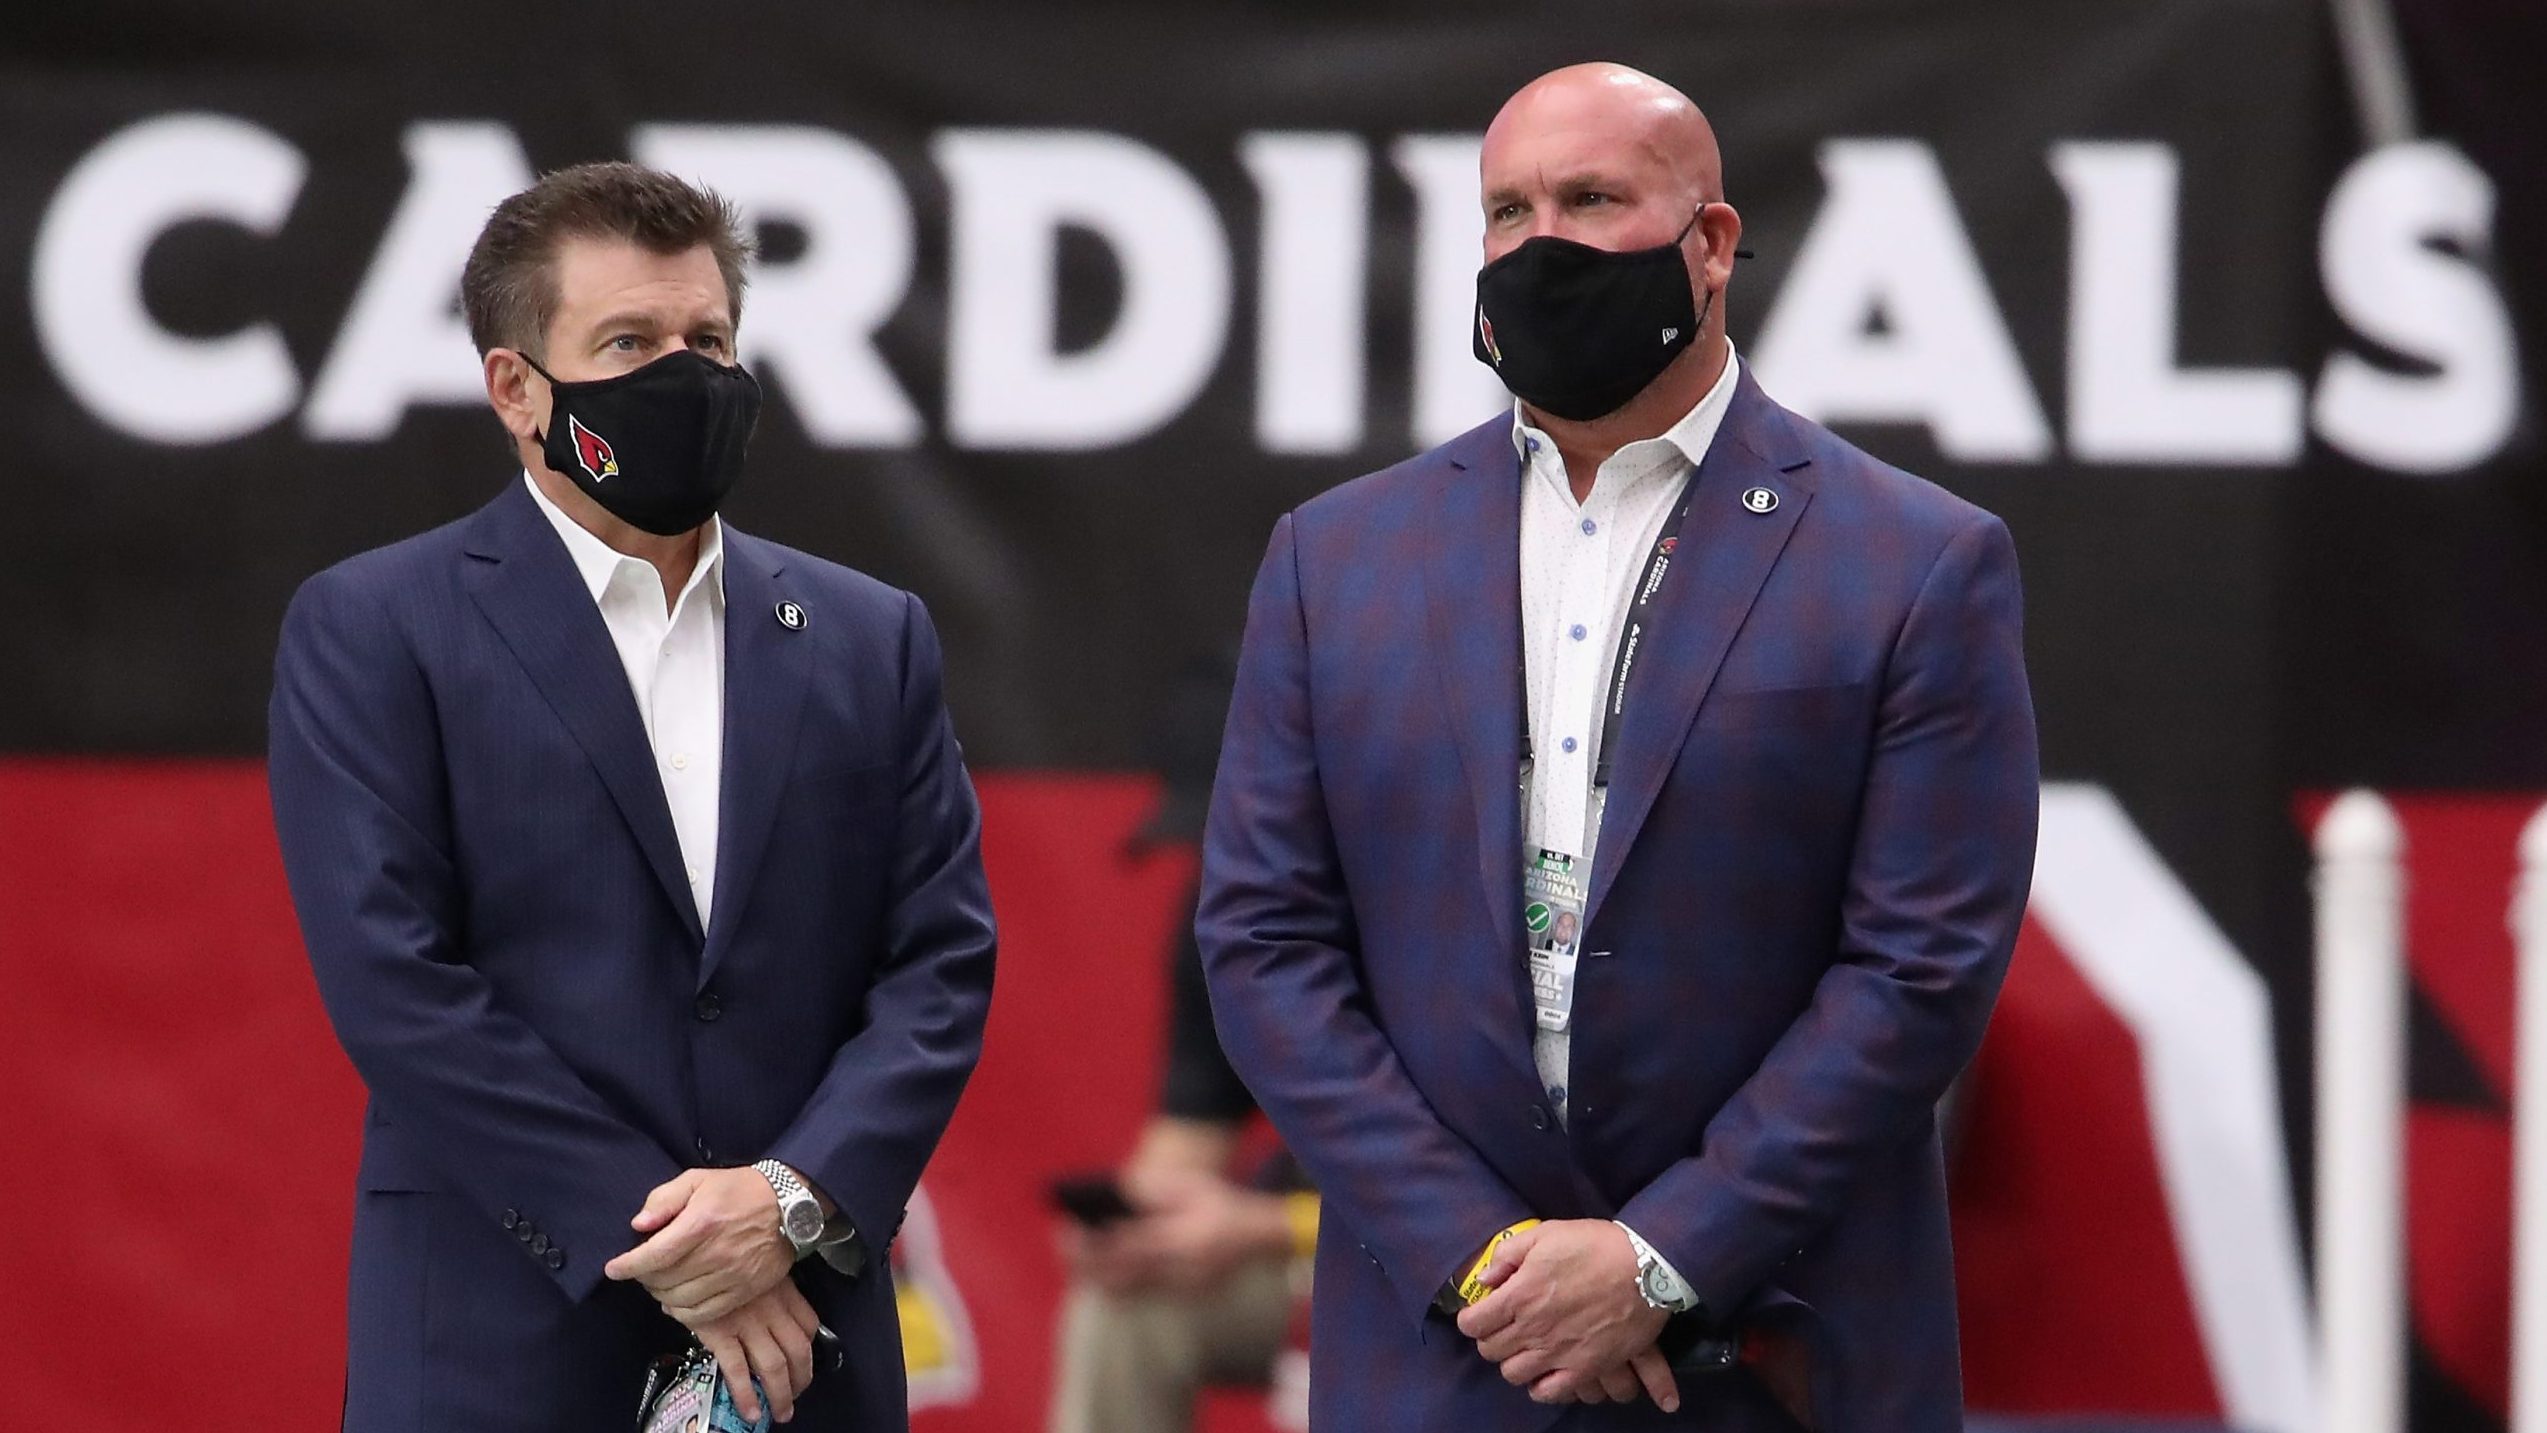 (L-R) President and owner Michael Bidwill and general manager Steve Keim of the Arizona Cardinals w...